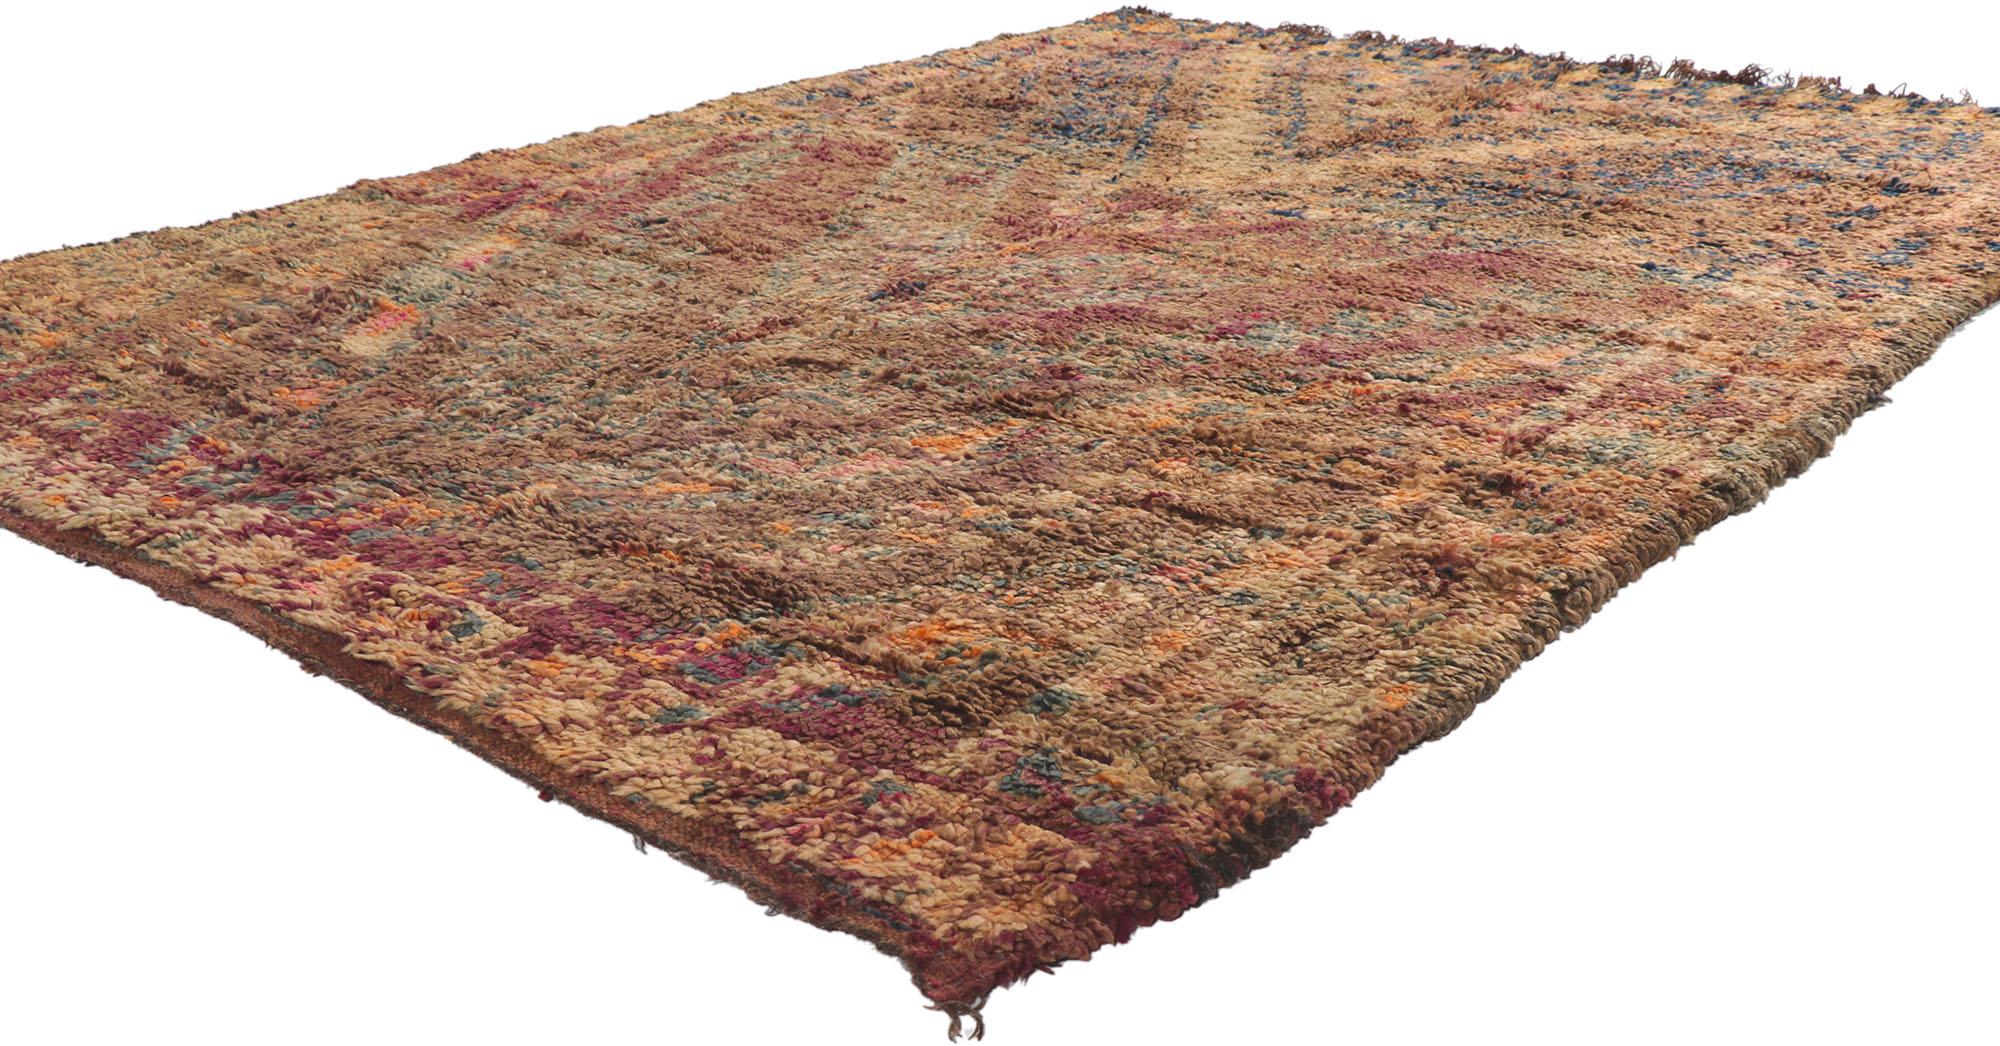 21255 Vintage Berber Moroccan Rug, 05'10 x 07'11.
Modern luxe meets ultra cozy in this hand-knotted wool vintage Moroccan rug. The distinctive tribal elements and warm earth-tone colors woven into this piece work together to creating a coveted